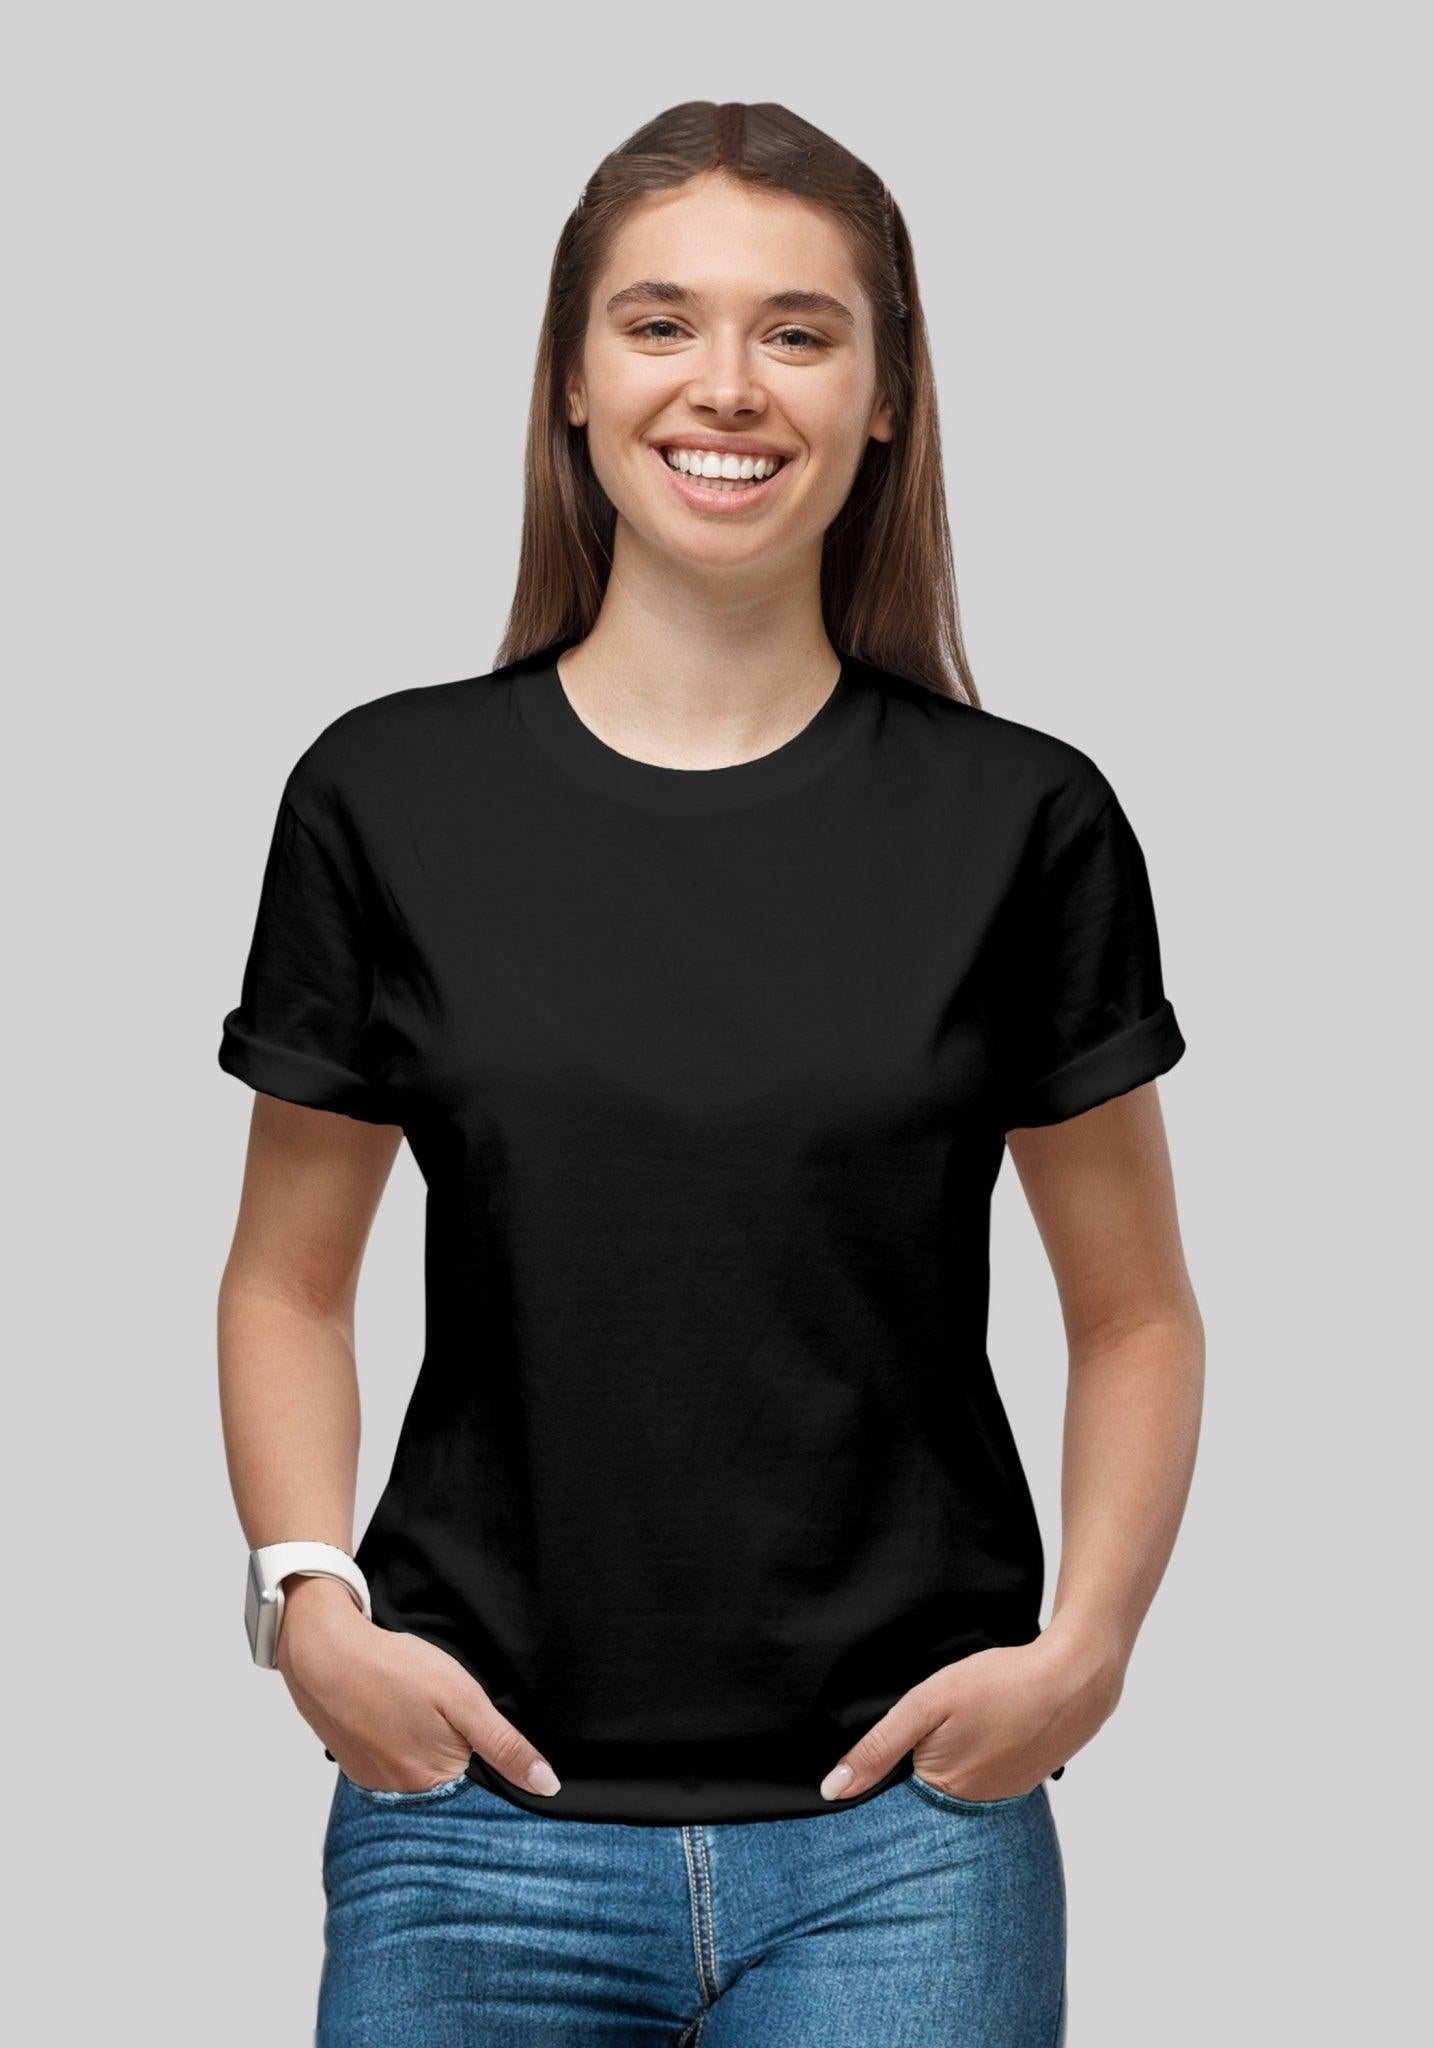 Buy online Women's Plain Crew Neck T-shirt from western wear for Women by  The Fashion Hub for ₹500 at 50% off